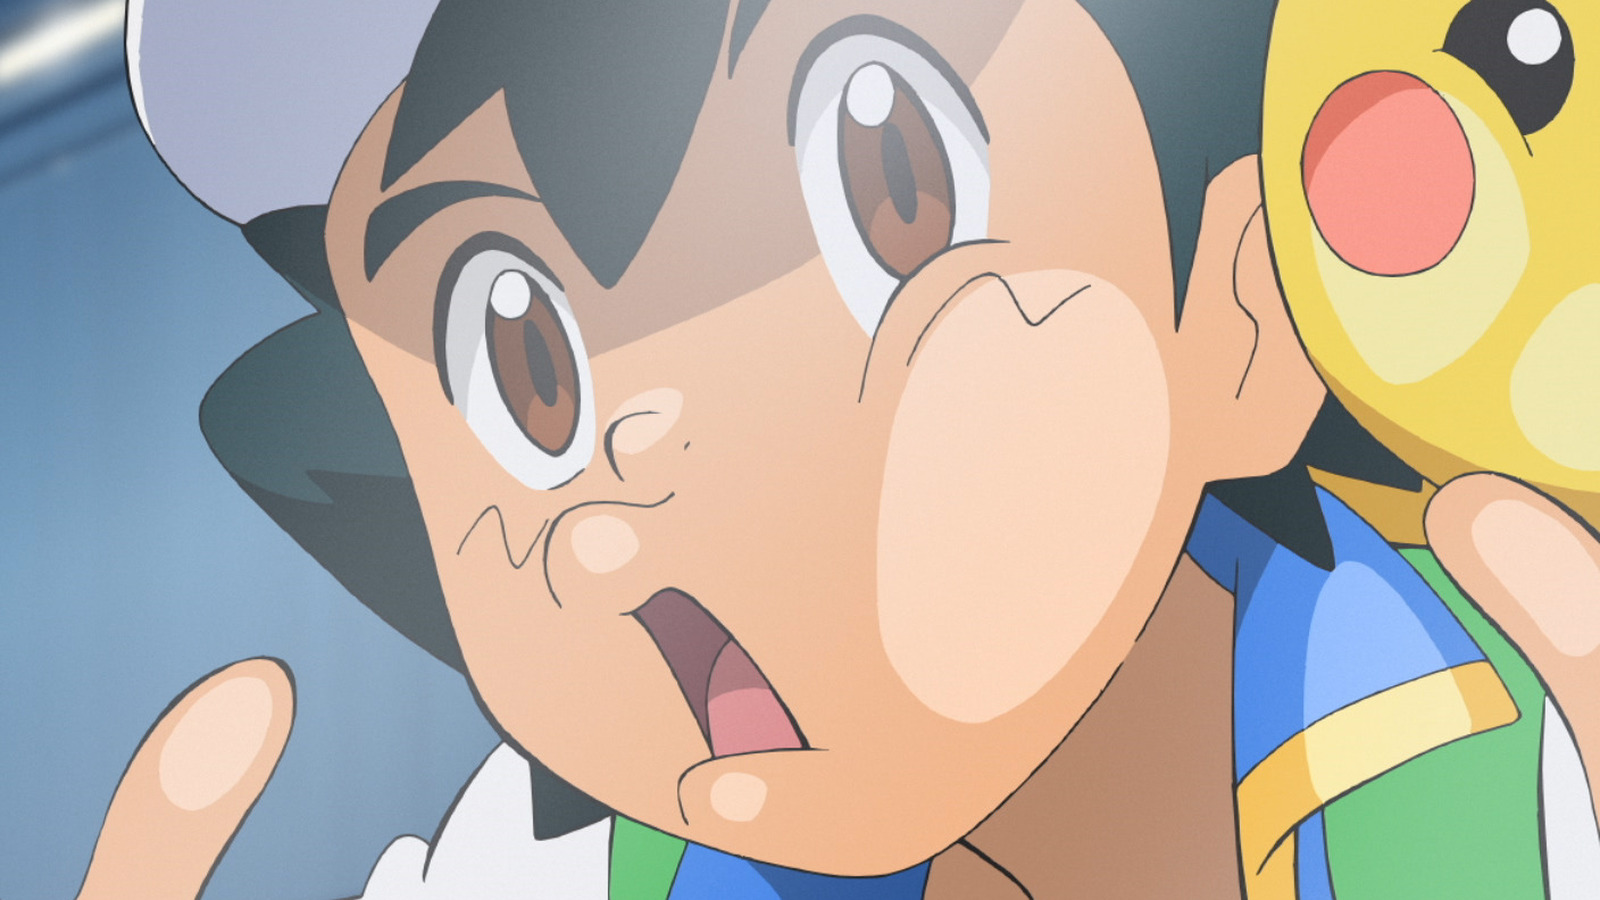 Pokemon Reveals Whether Ash Becomes a Pokemon Master in Final Episode